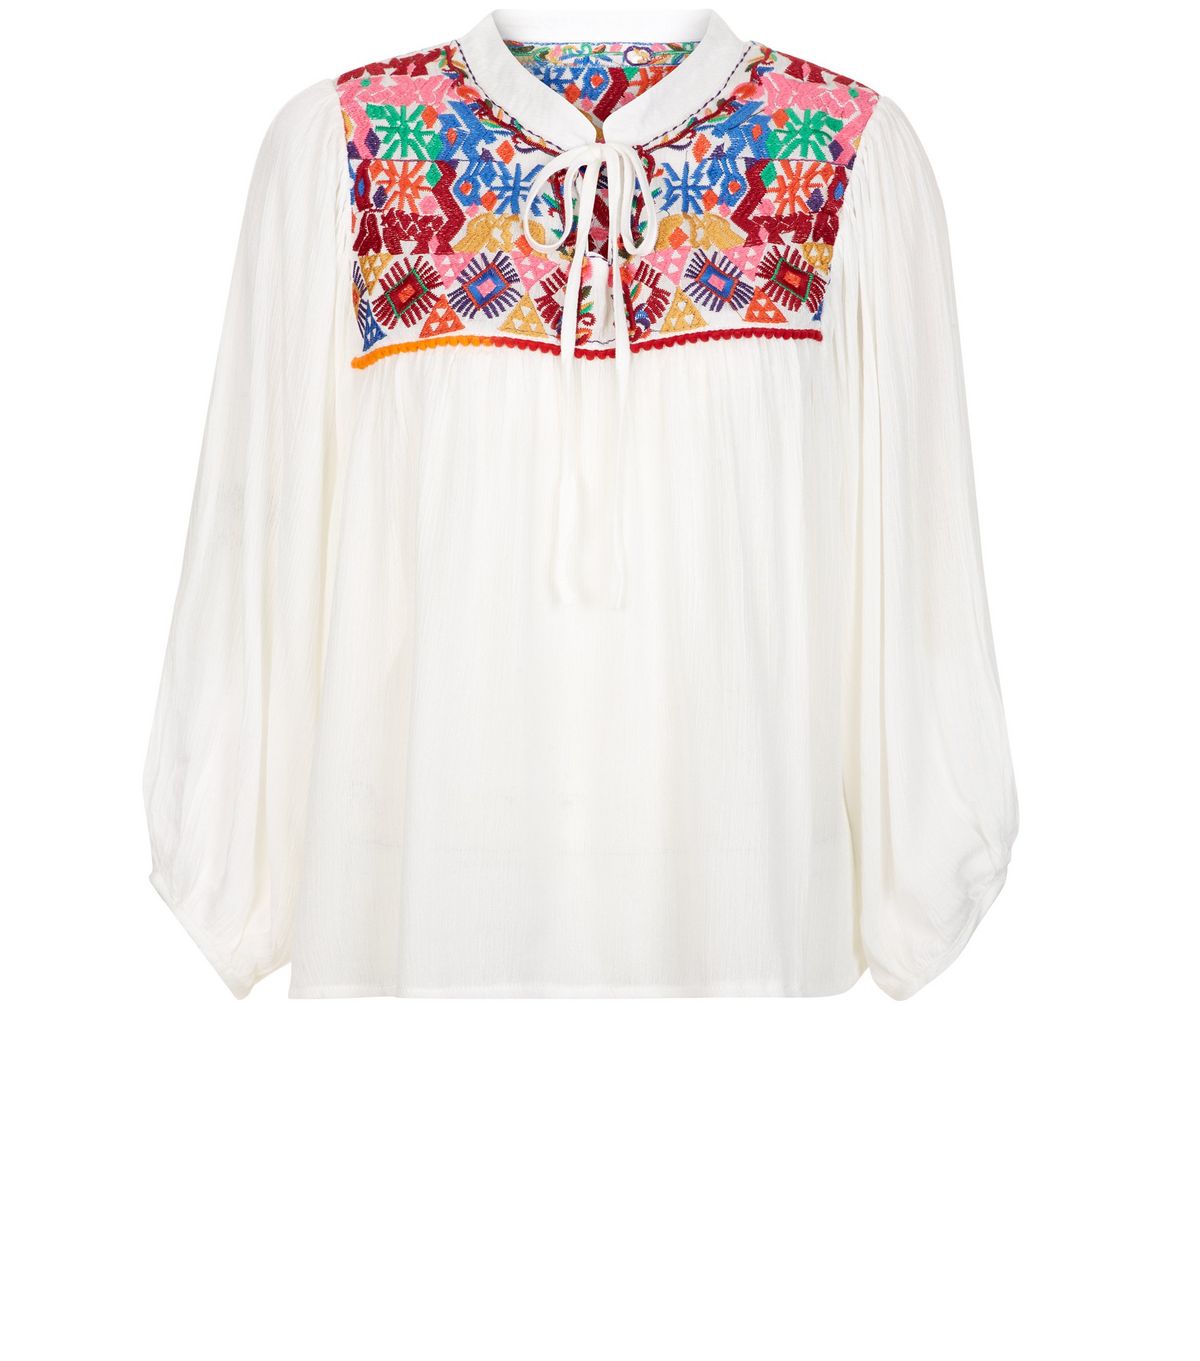 School Run Style : 12 Embroidered Tops & Jackets | The London Mummy